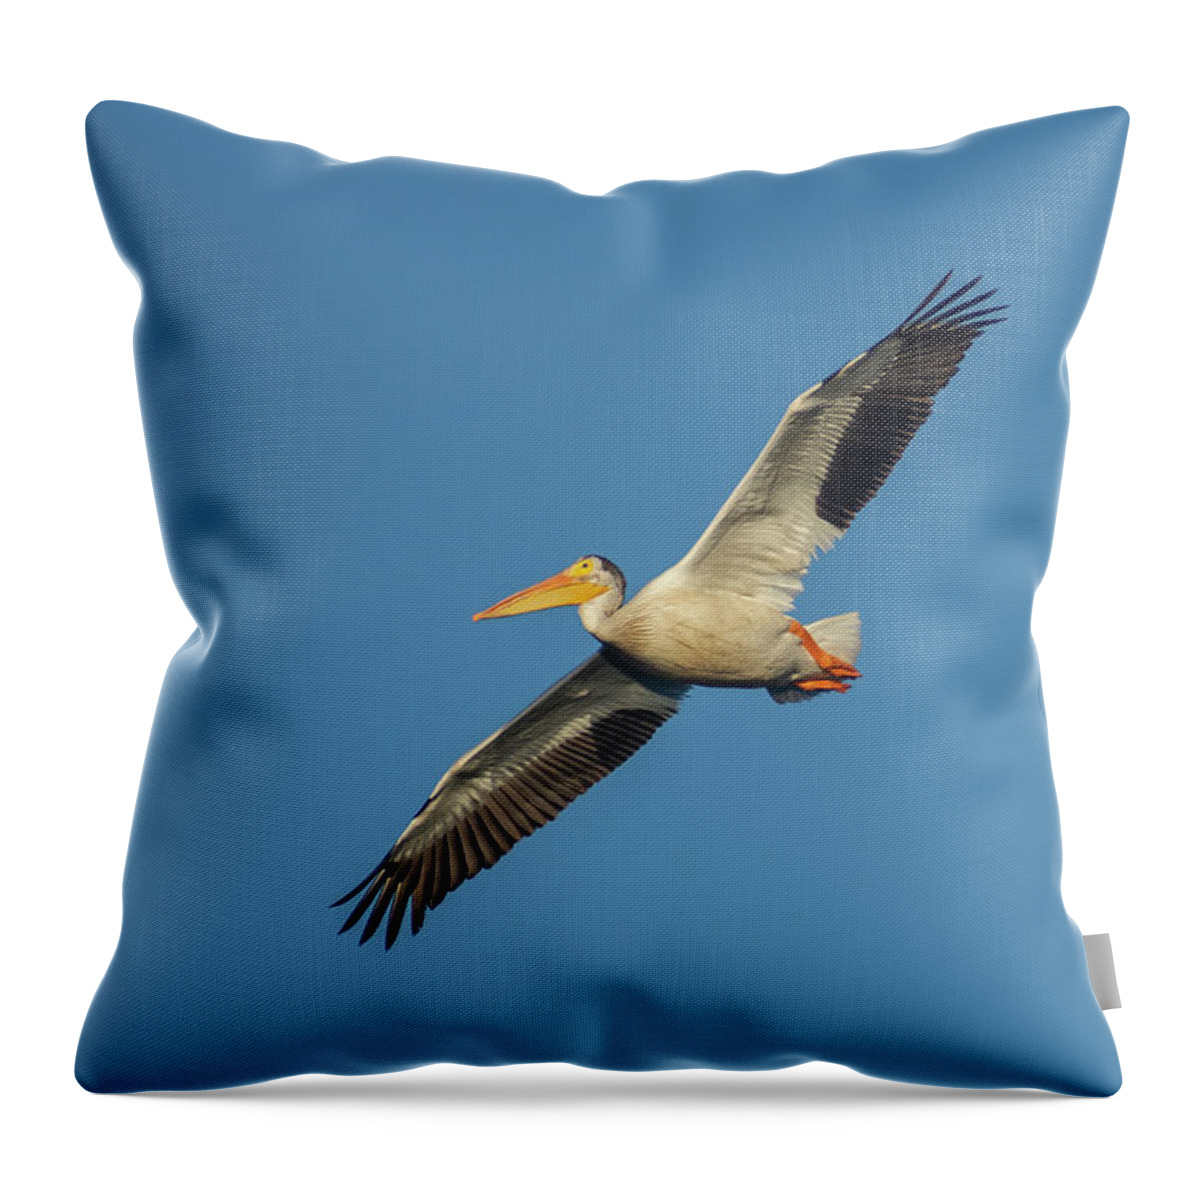 Pelican Throw Pillow featuring the photograph Pelican by Rick Mosher